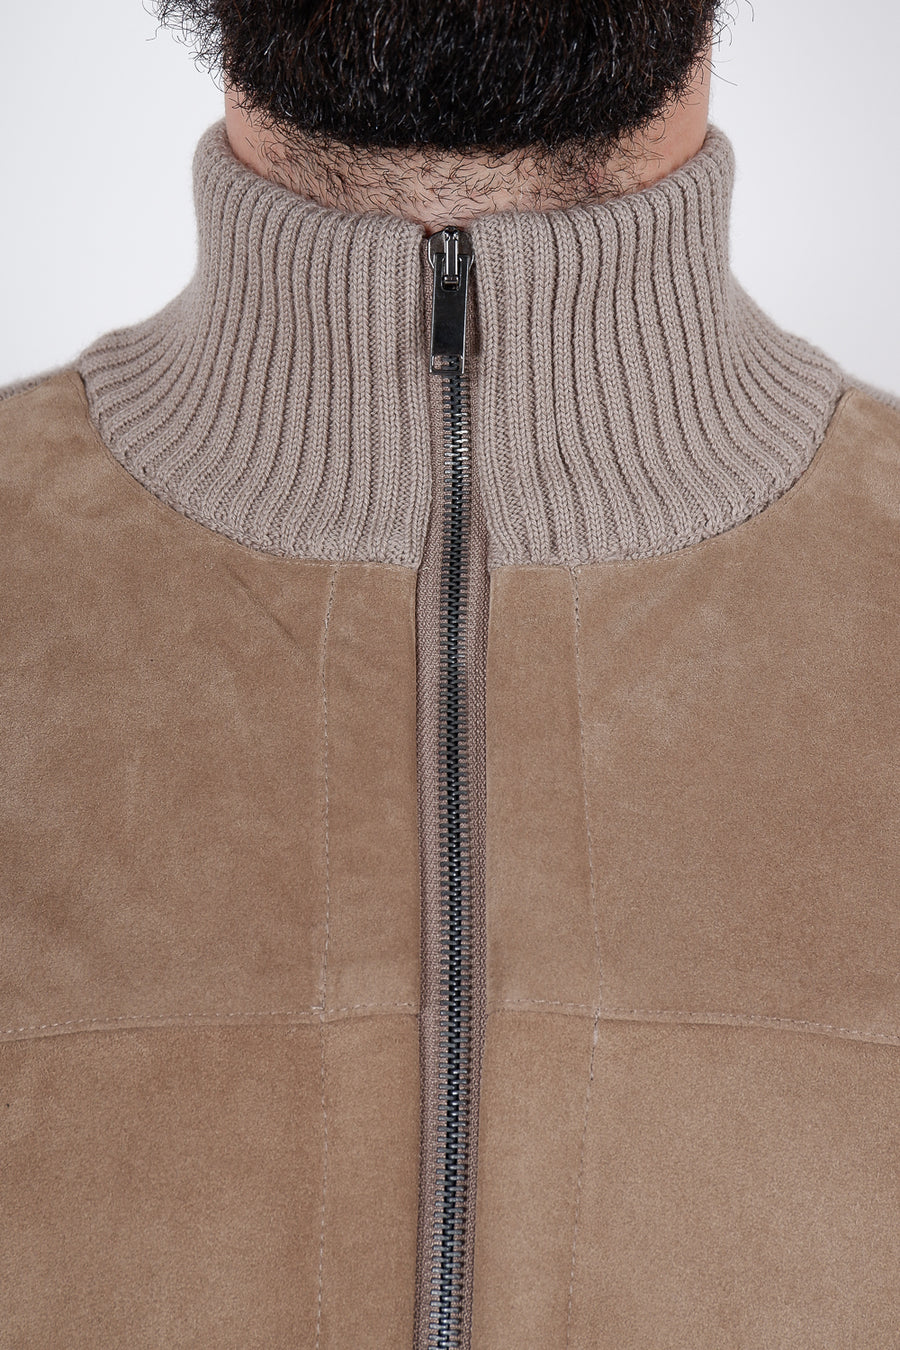 Buy the Daniele Fiesoli Zip-Up Knitted Suede Bomber Taupe at Intro. Spend £50 for free UK delivery. Official stockists. We ship worldwide.